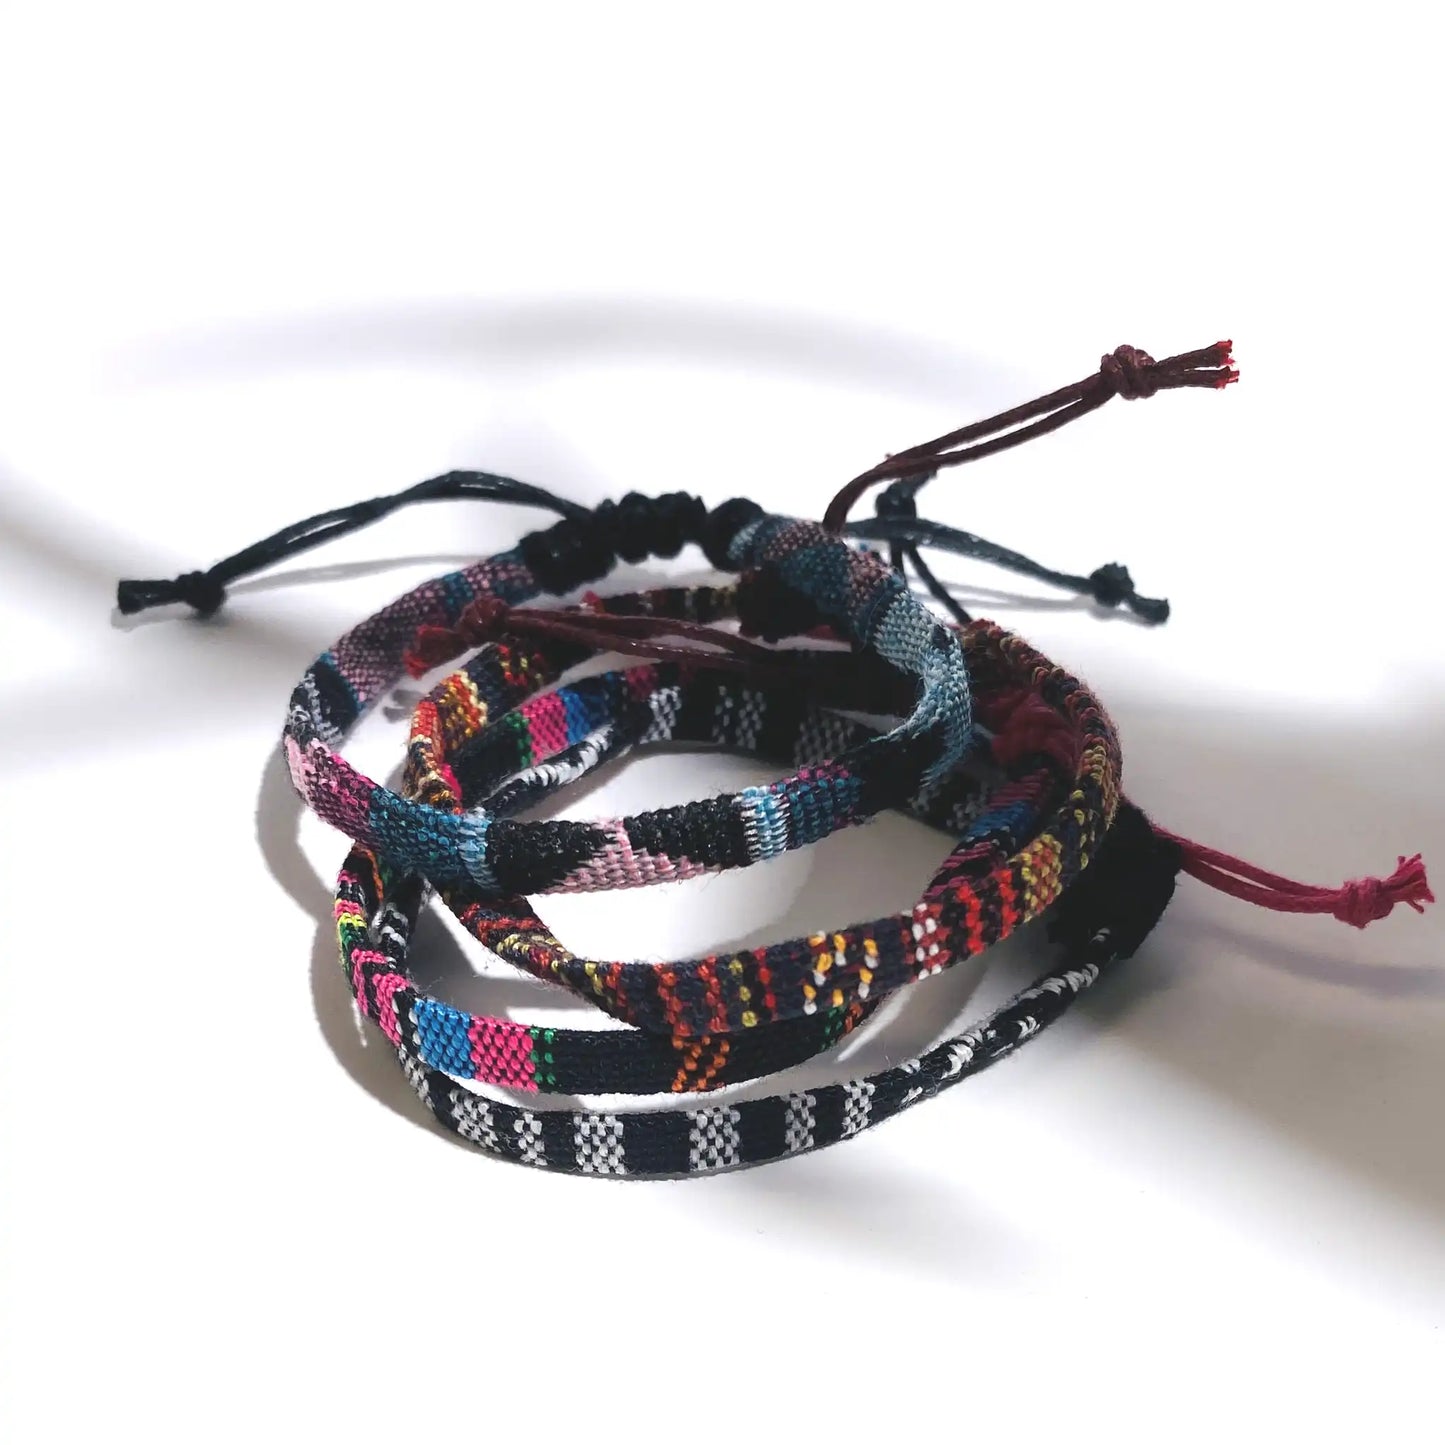 By Valenti BOHO Style Woven Bracelates Made from Natural Materials